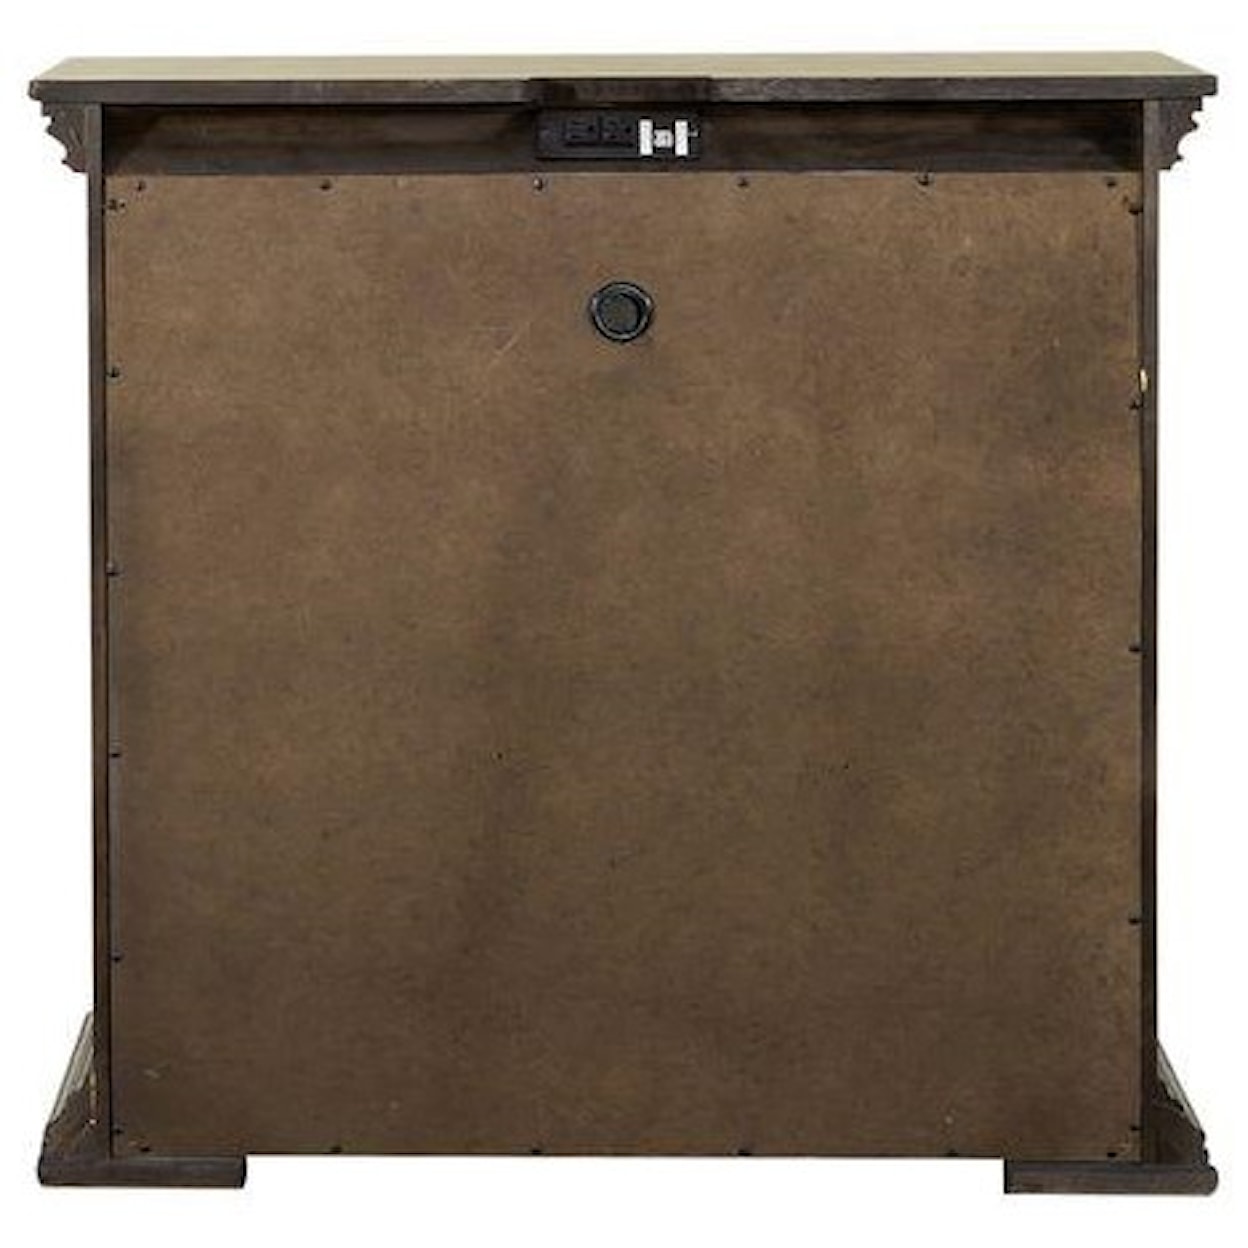 Liberty Furniture Big Valley BEDSIDE CHEST